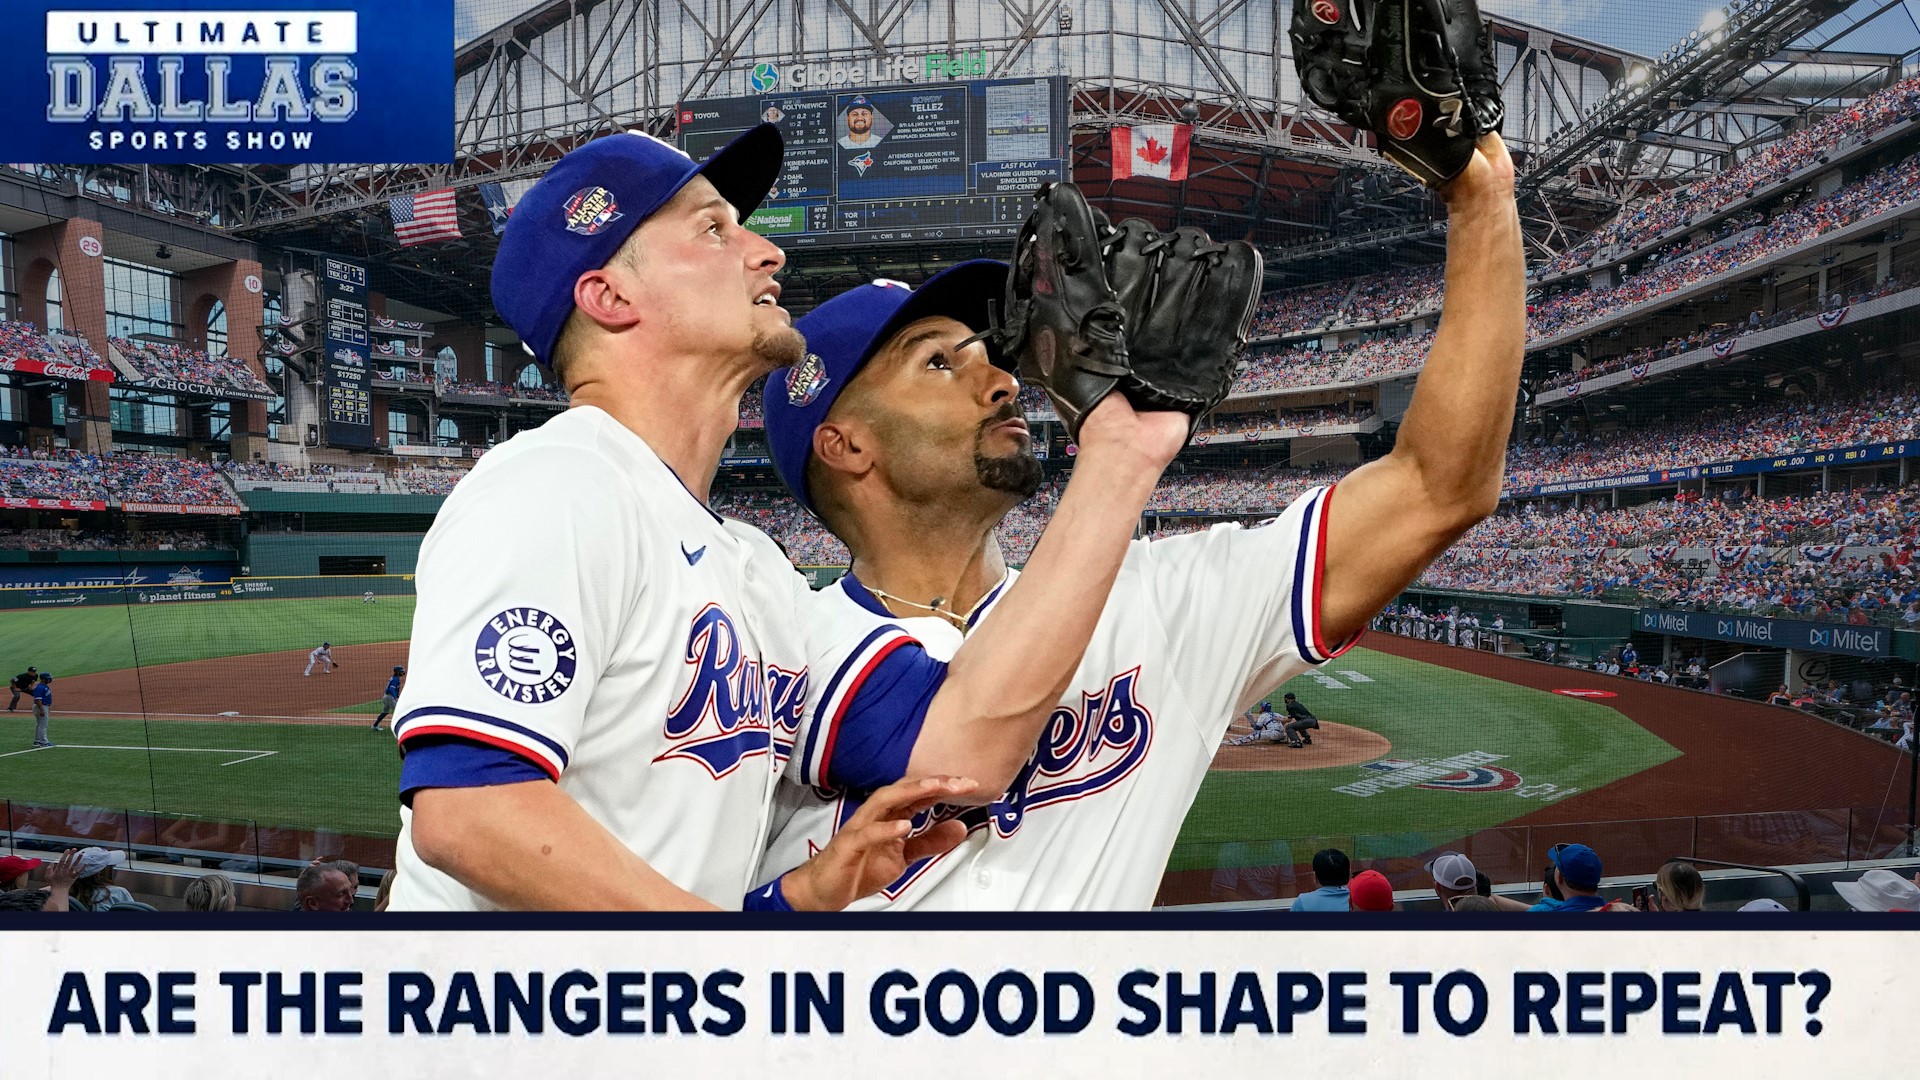 After a picking up where they left off last season, do the Texas Rangers look poised to make another run at a World Series title?